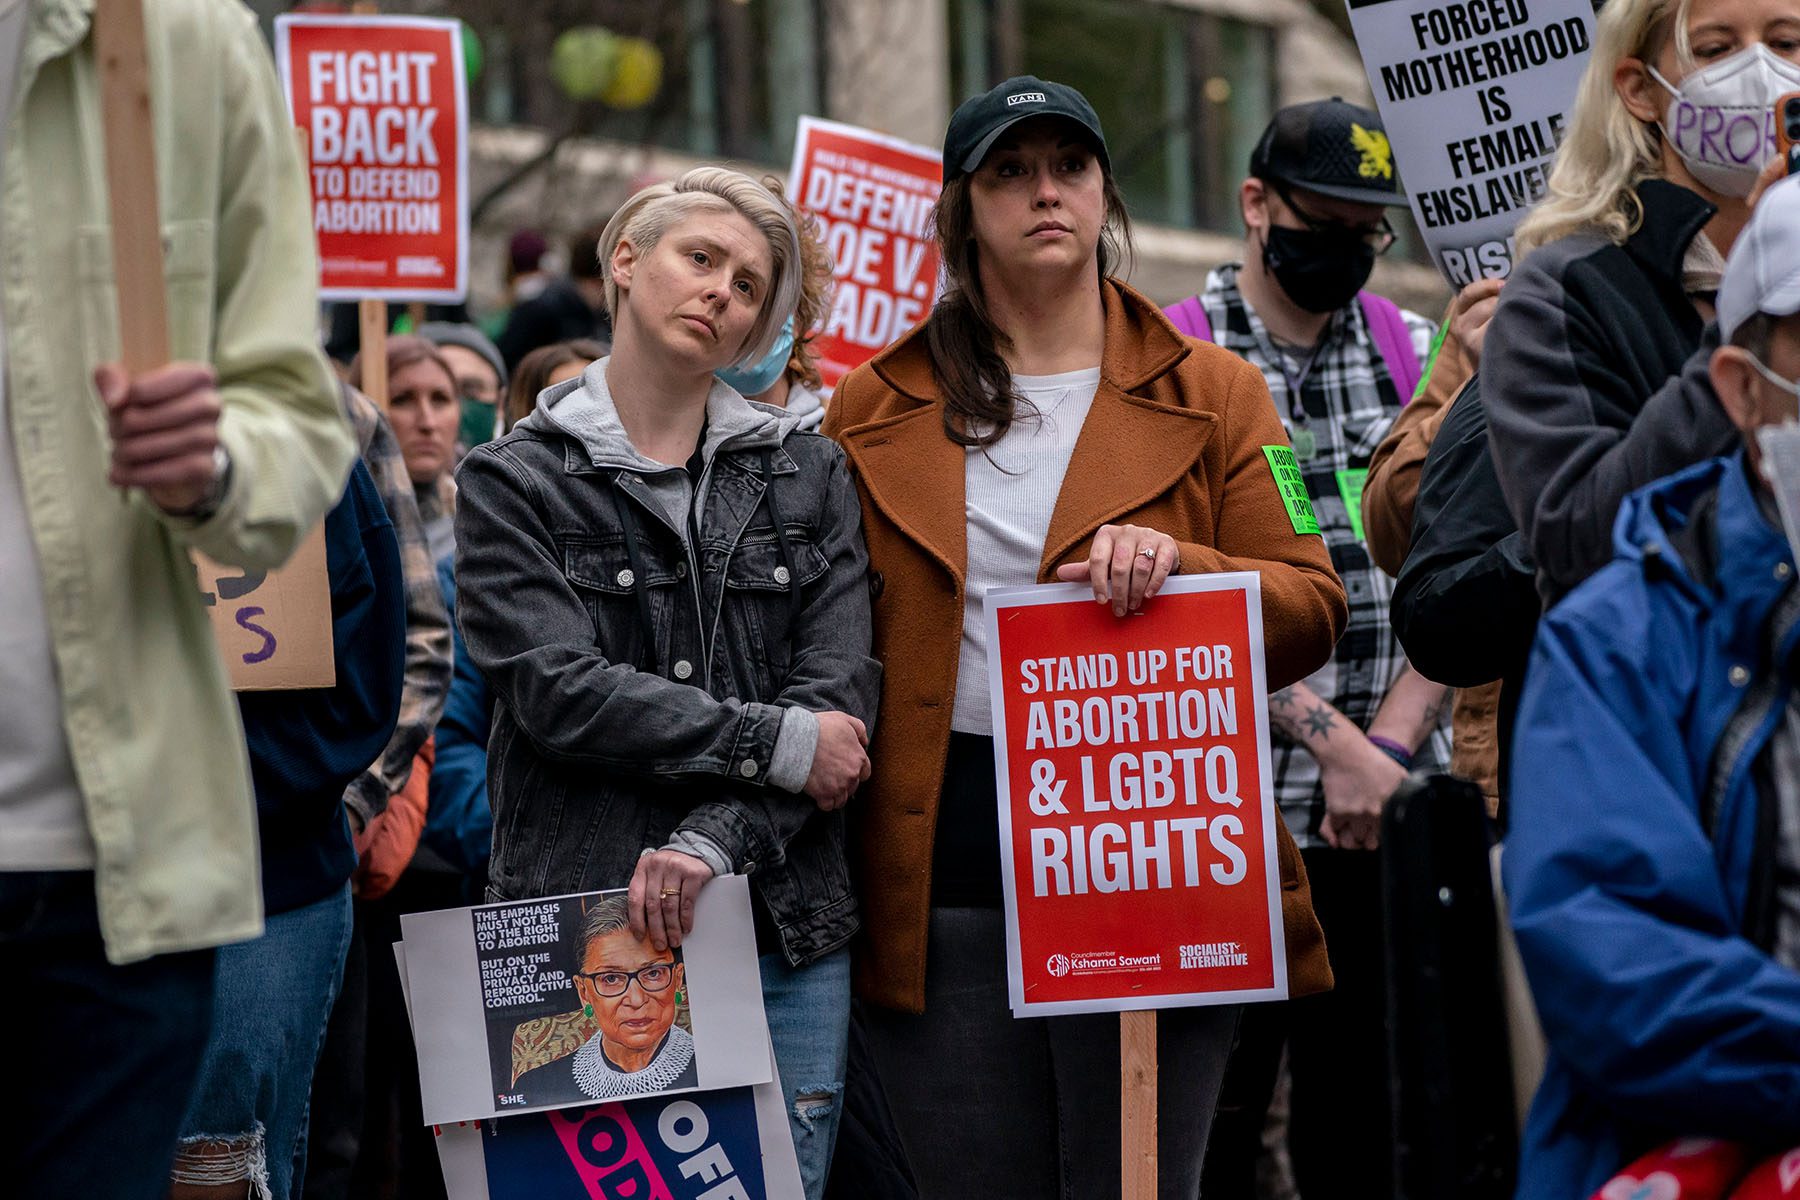 Demonstrators react during a rally while holding a sign that reads "Stand up for Abortion & LGBTQ rights" in May 2022 in Seattle, Washington.